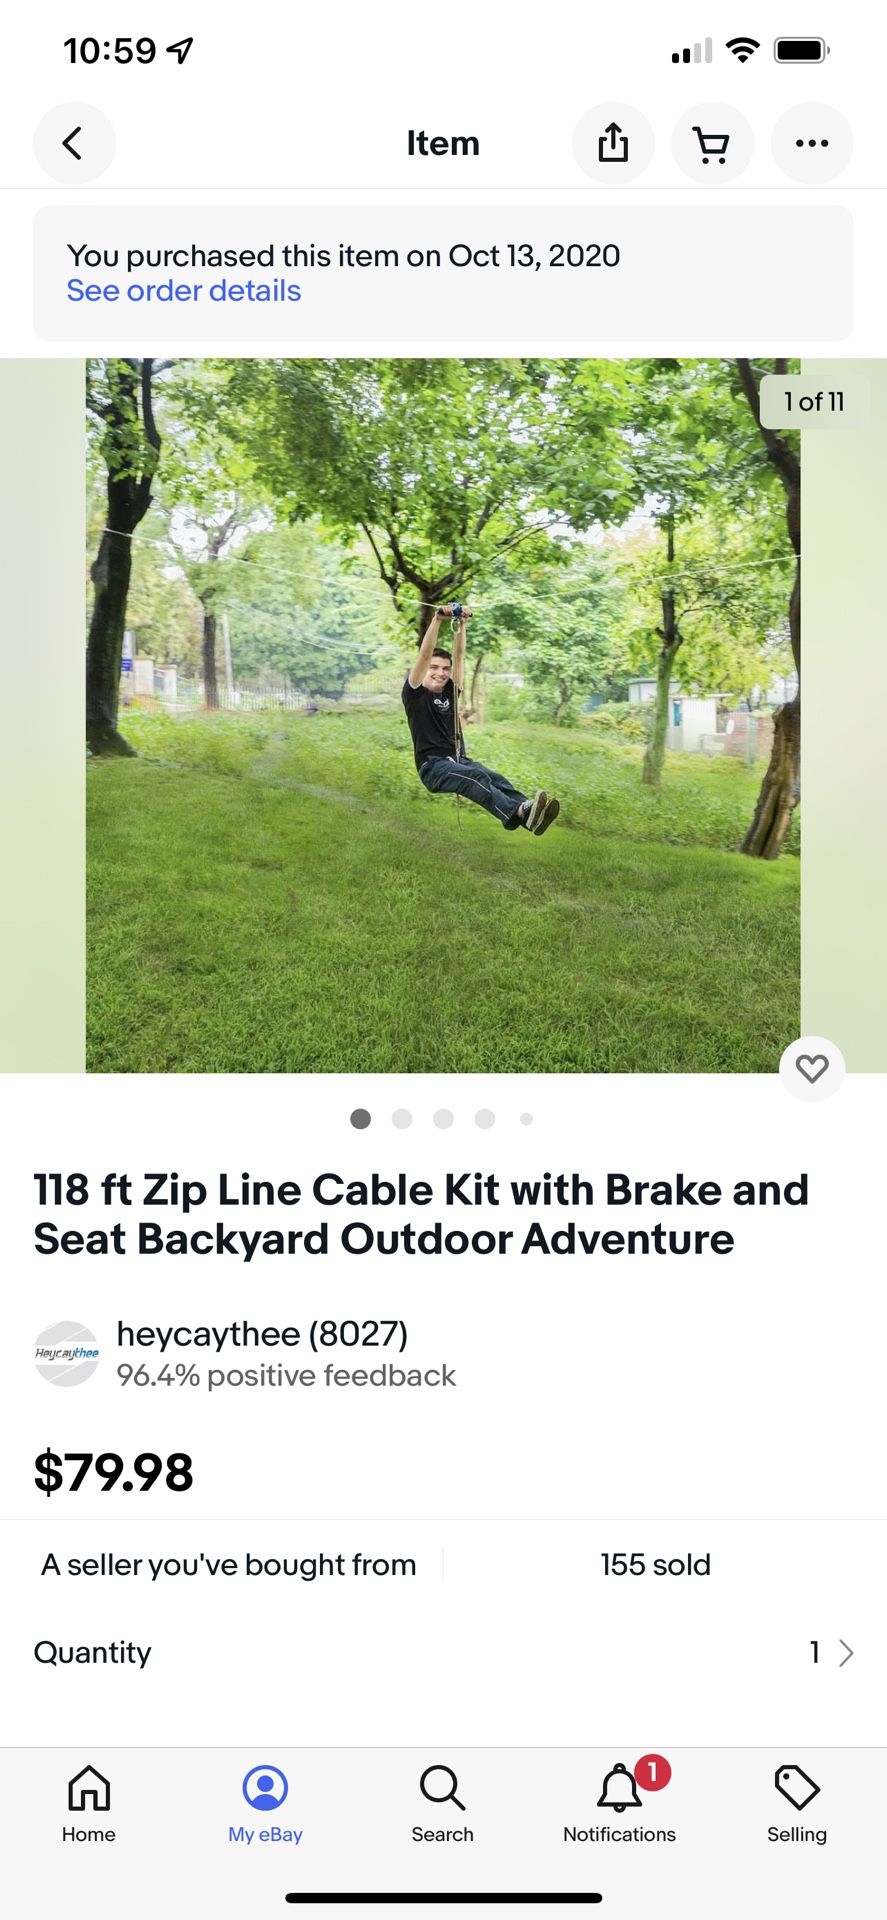 118 ft Zip Line Cable Kit with Brake and Seat Backyard Outdoor Adventure - Great Condition. Comes with two spring brakes for added safety. 